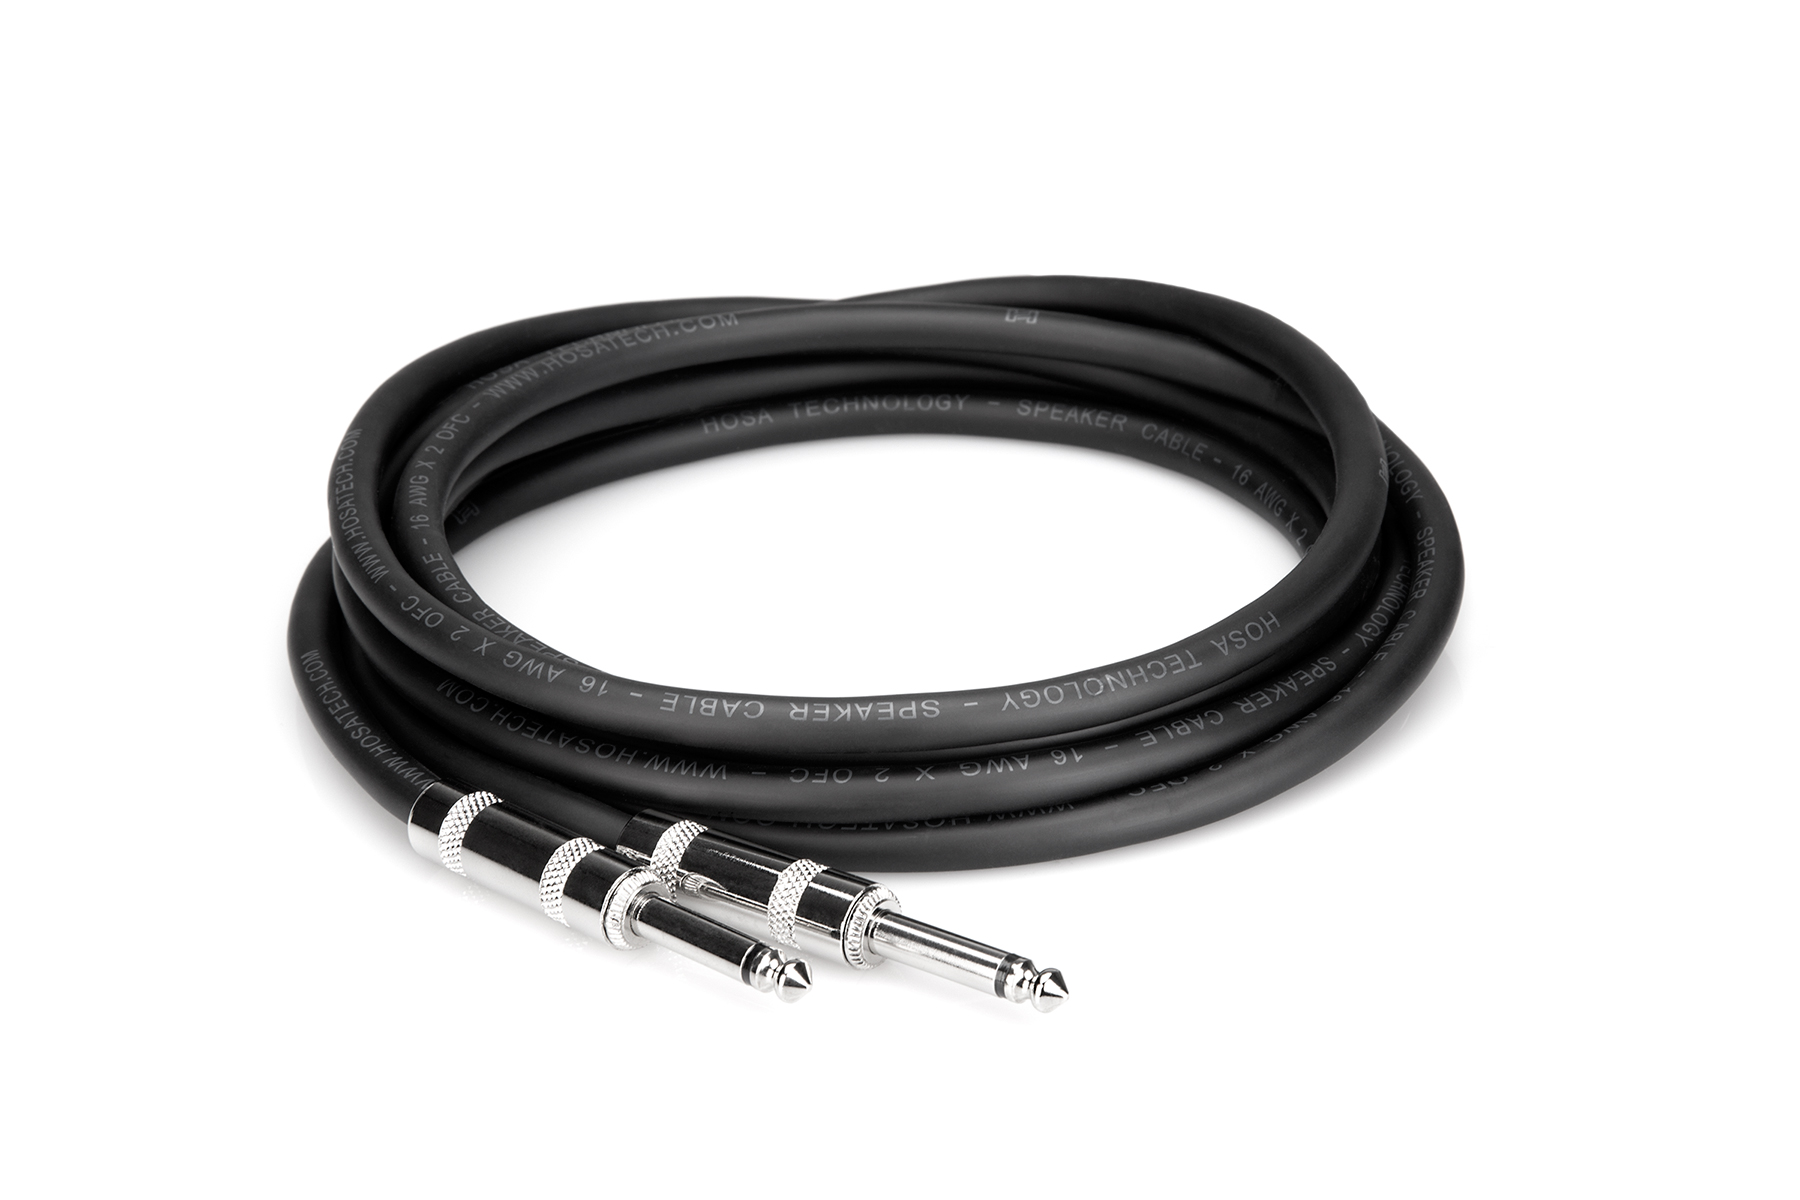 Audio-Technica AT690 1/4 Male to 1/4 Male Speaker Cable - 15